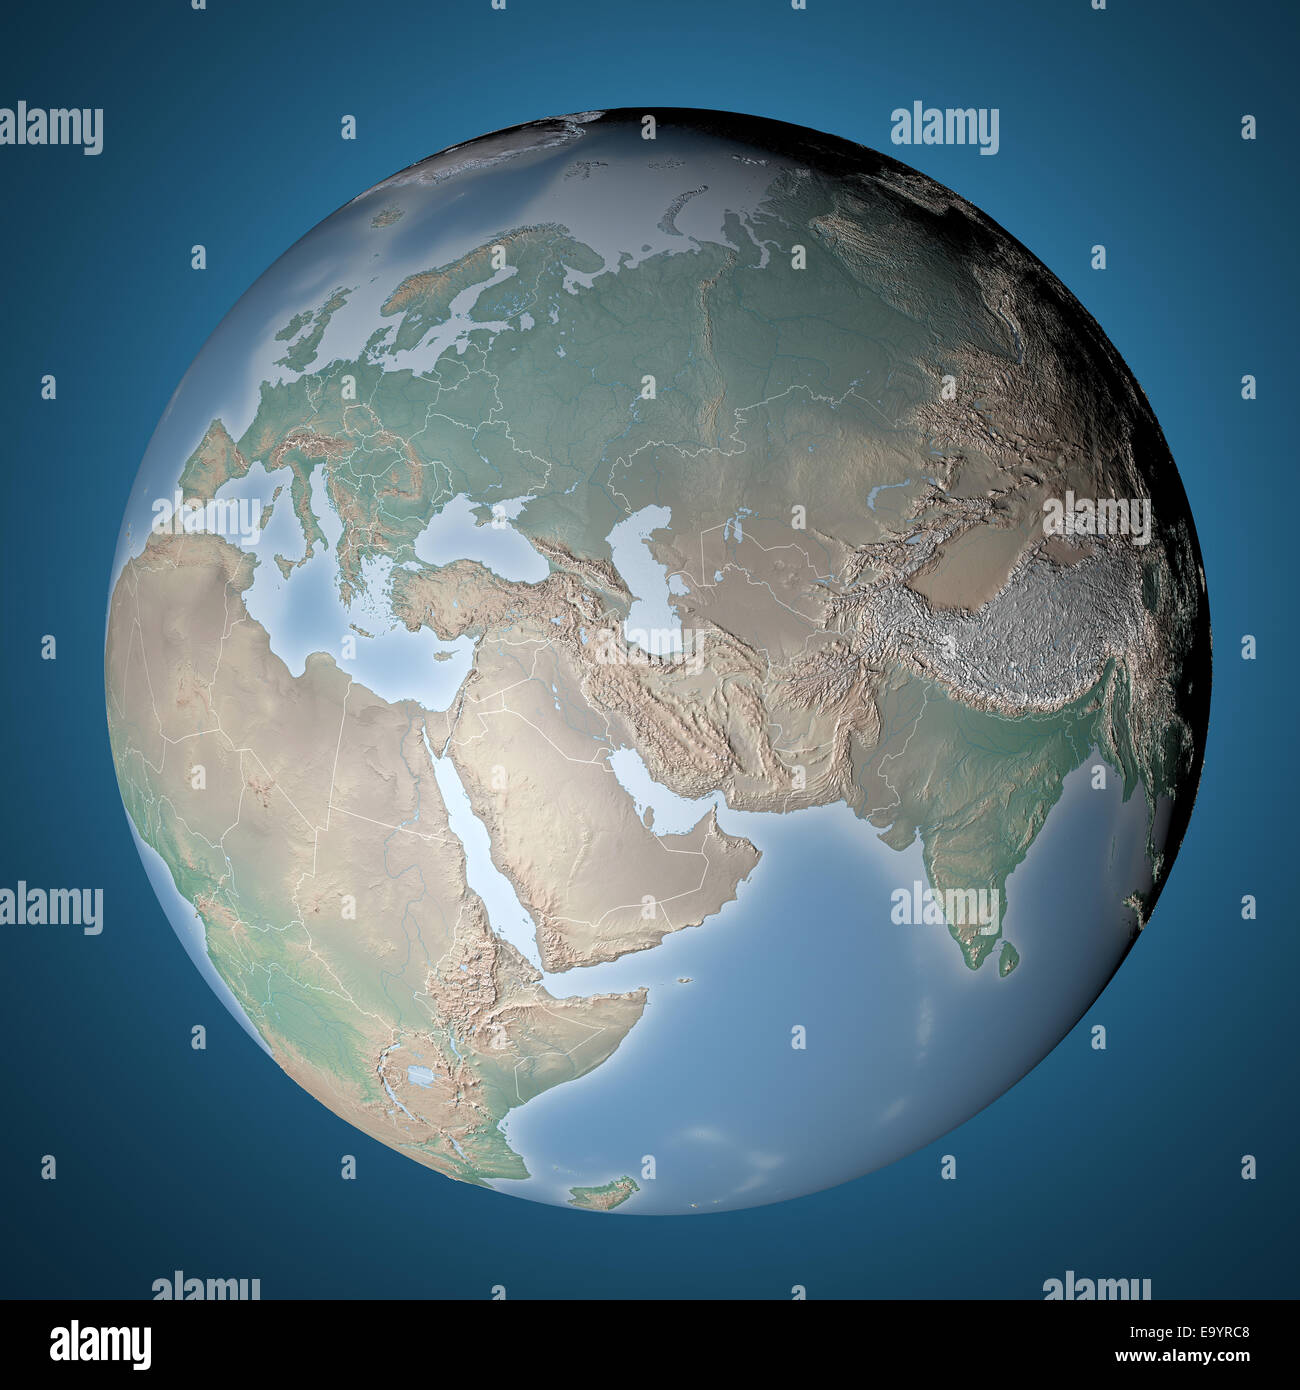 Globe icon with smooth shadows and white map of the continents of the world Stock Photo